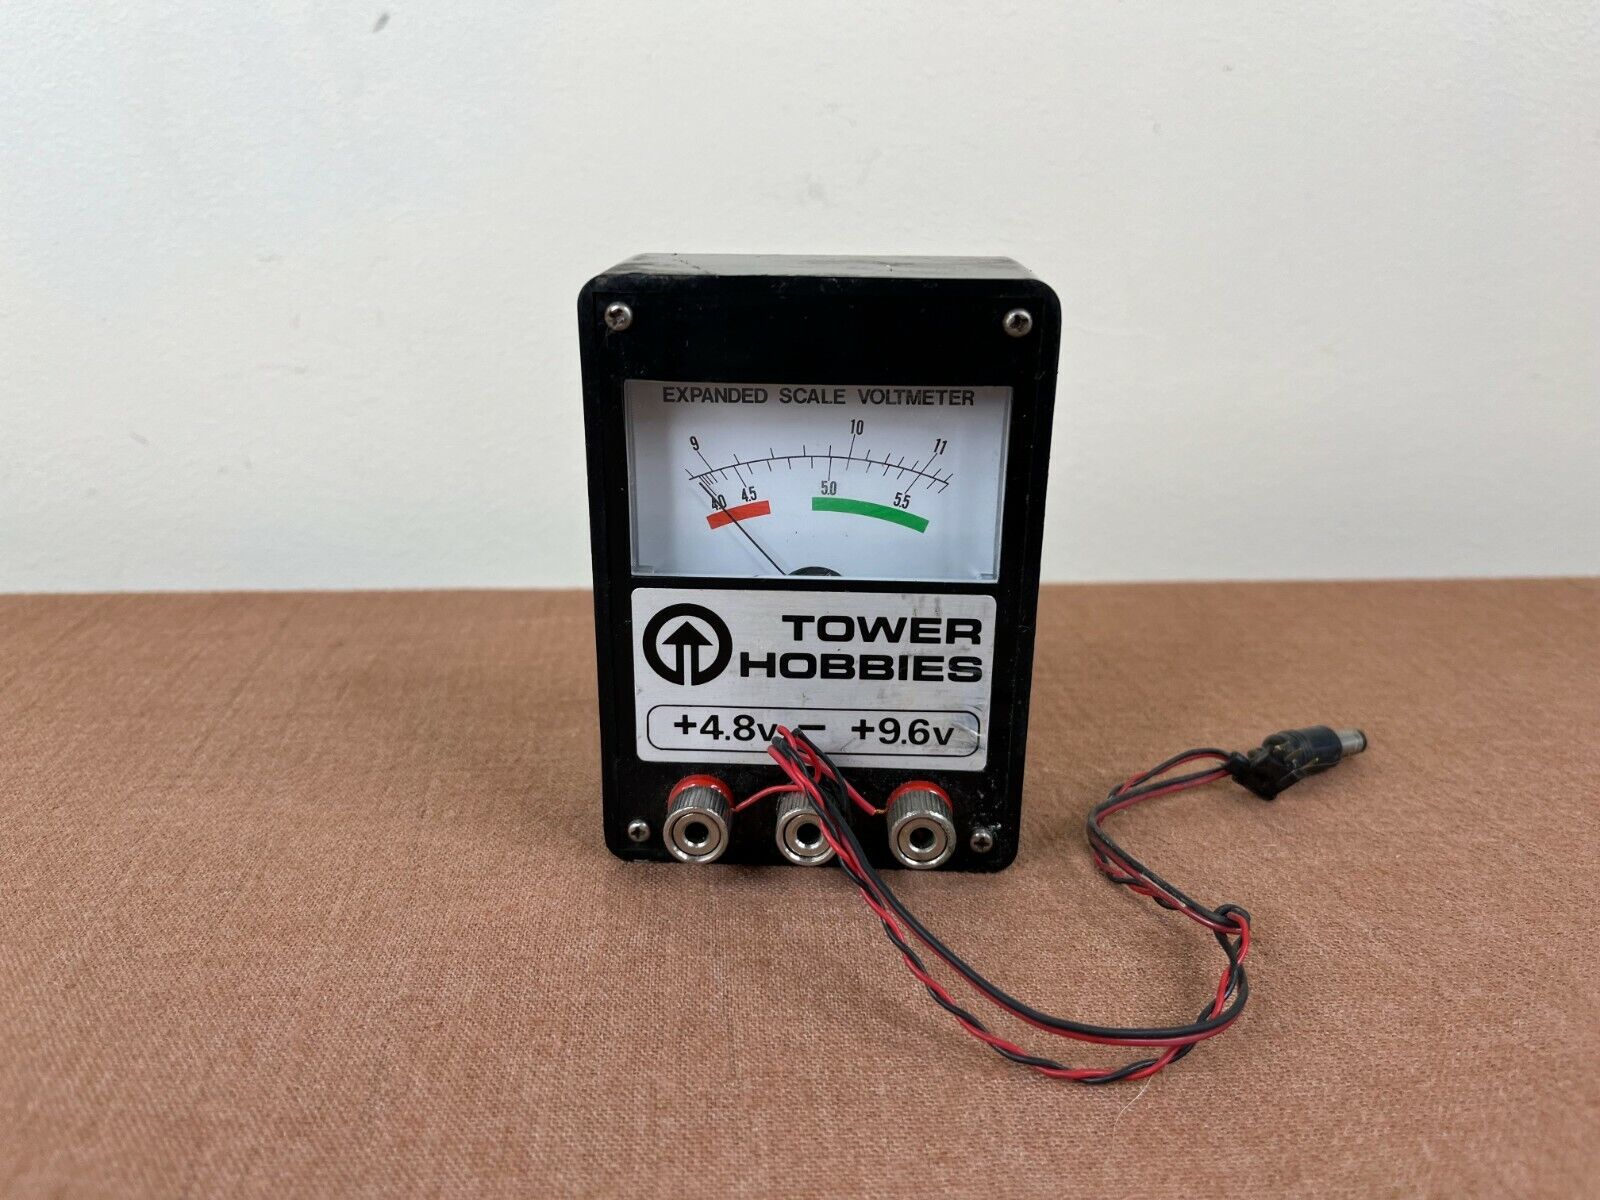 Tower Hobbies Expanded Scale Voltmeter 